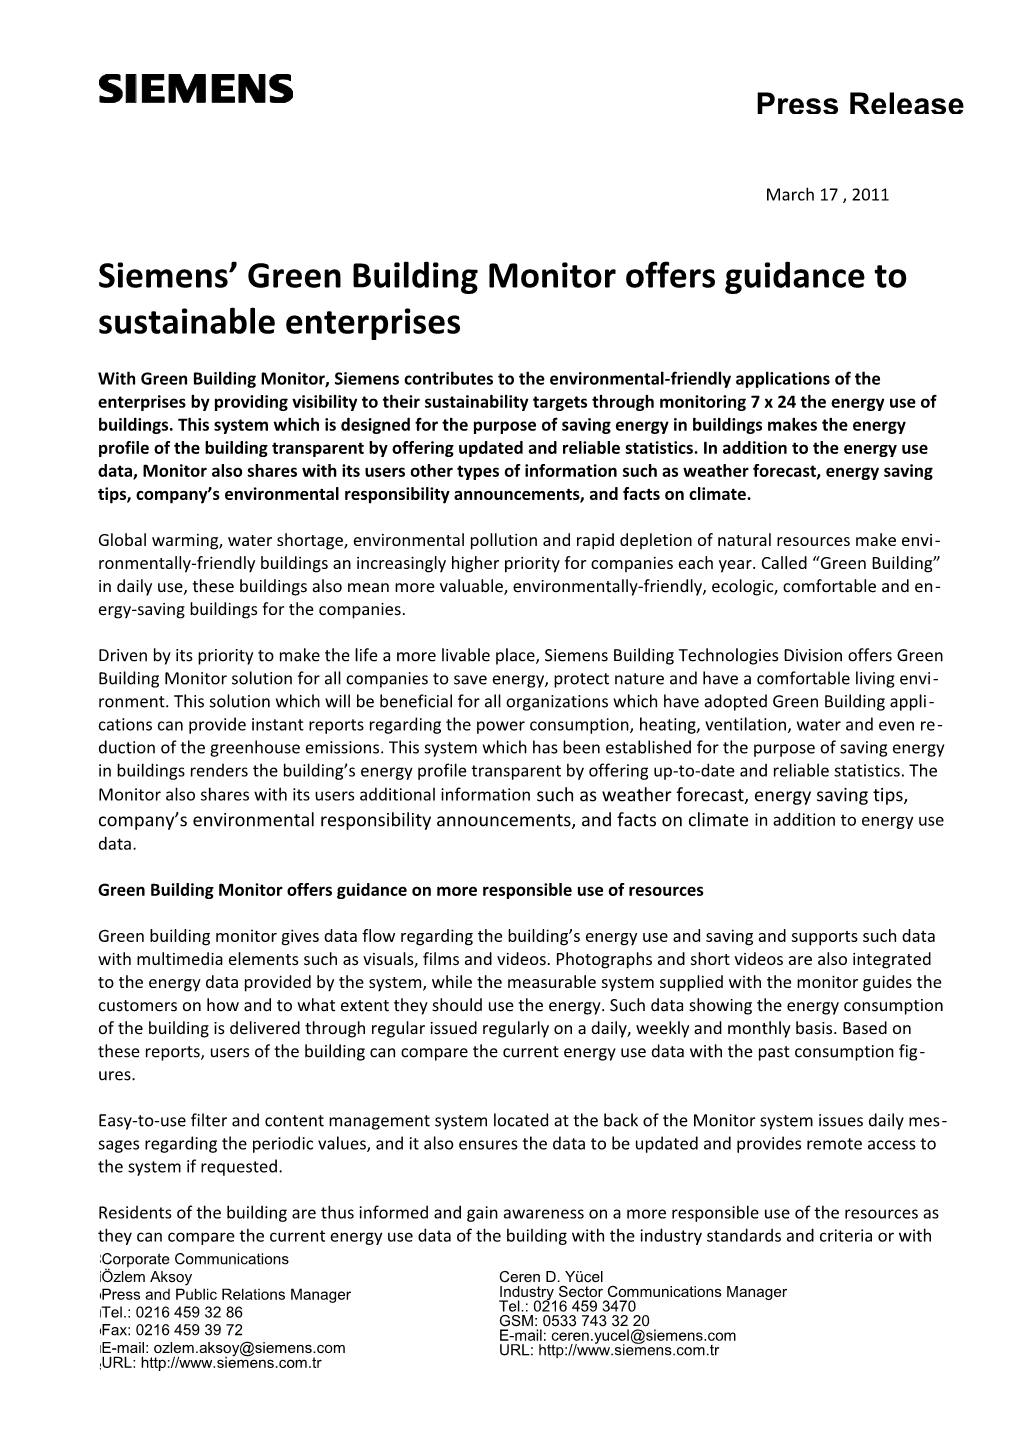 Siemens Green Building Monitor Offers Guidance to Sustainable Enterprises